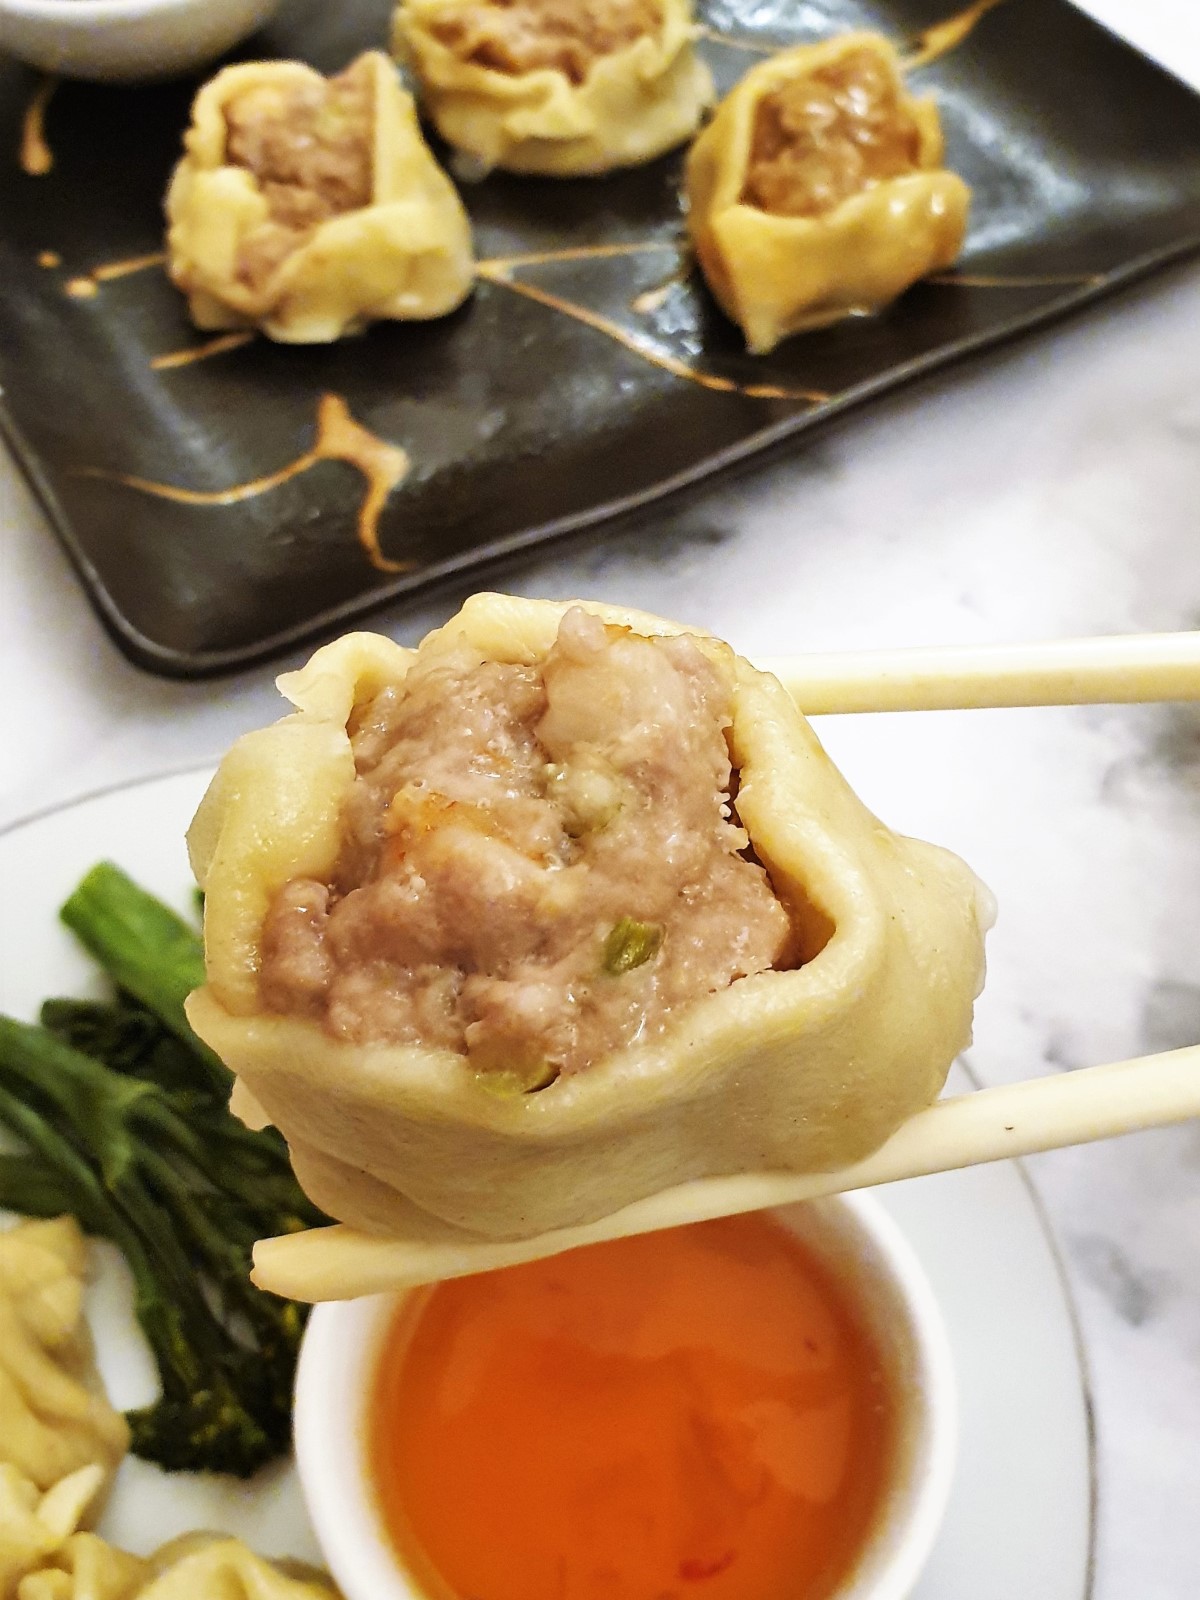 A steamed pork and shrimp dumpling held over a bowl of dipping sauce with a pair of chopsticks.